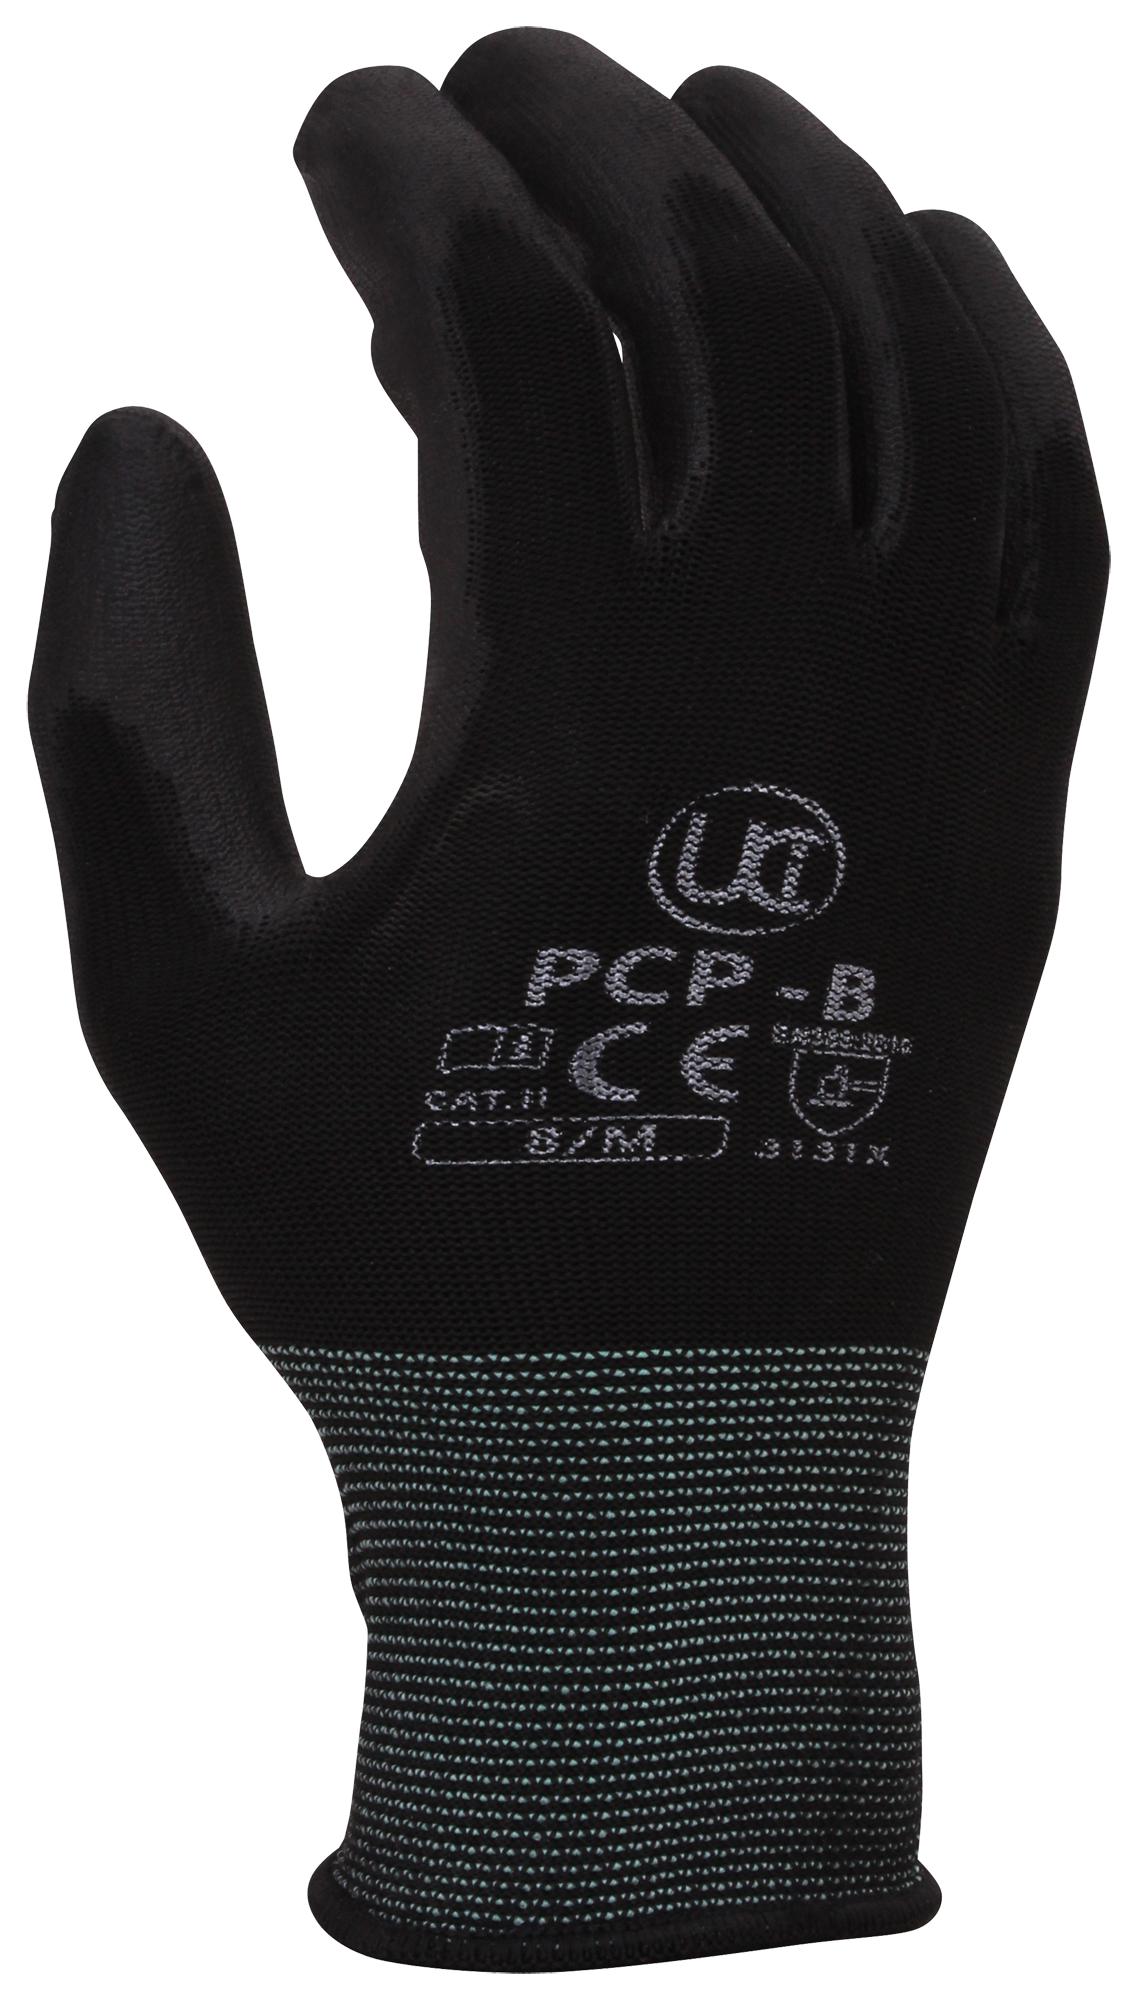 Uci G/pcp-B/08 Gloves, Pu Coated Polyester, Black, M